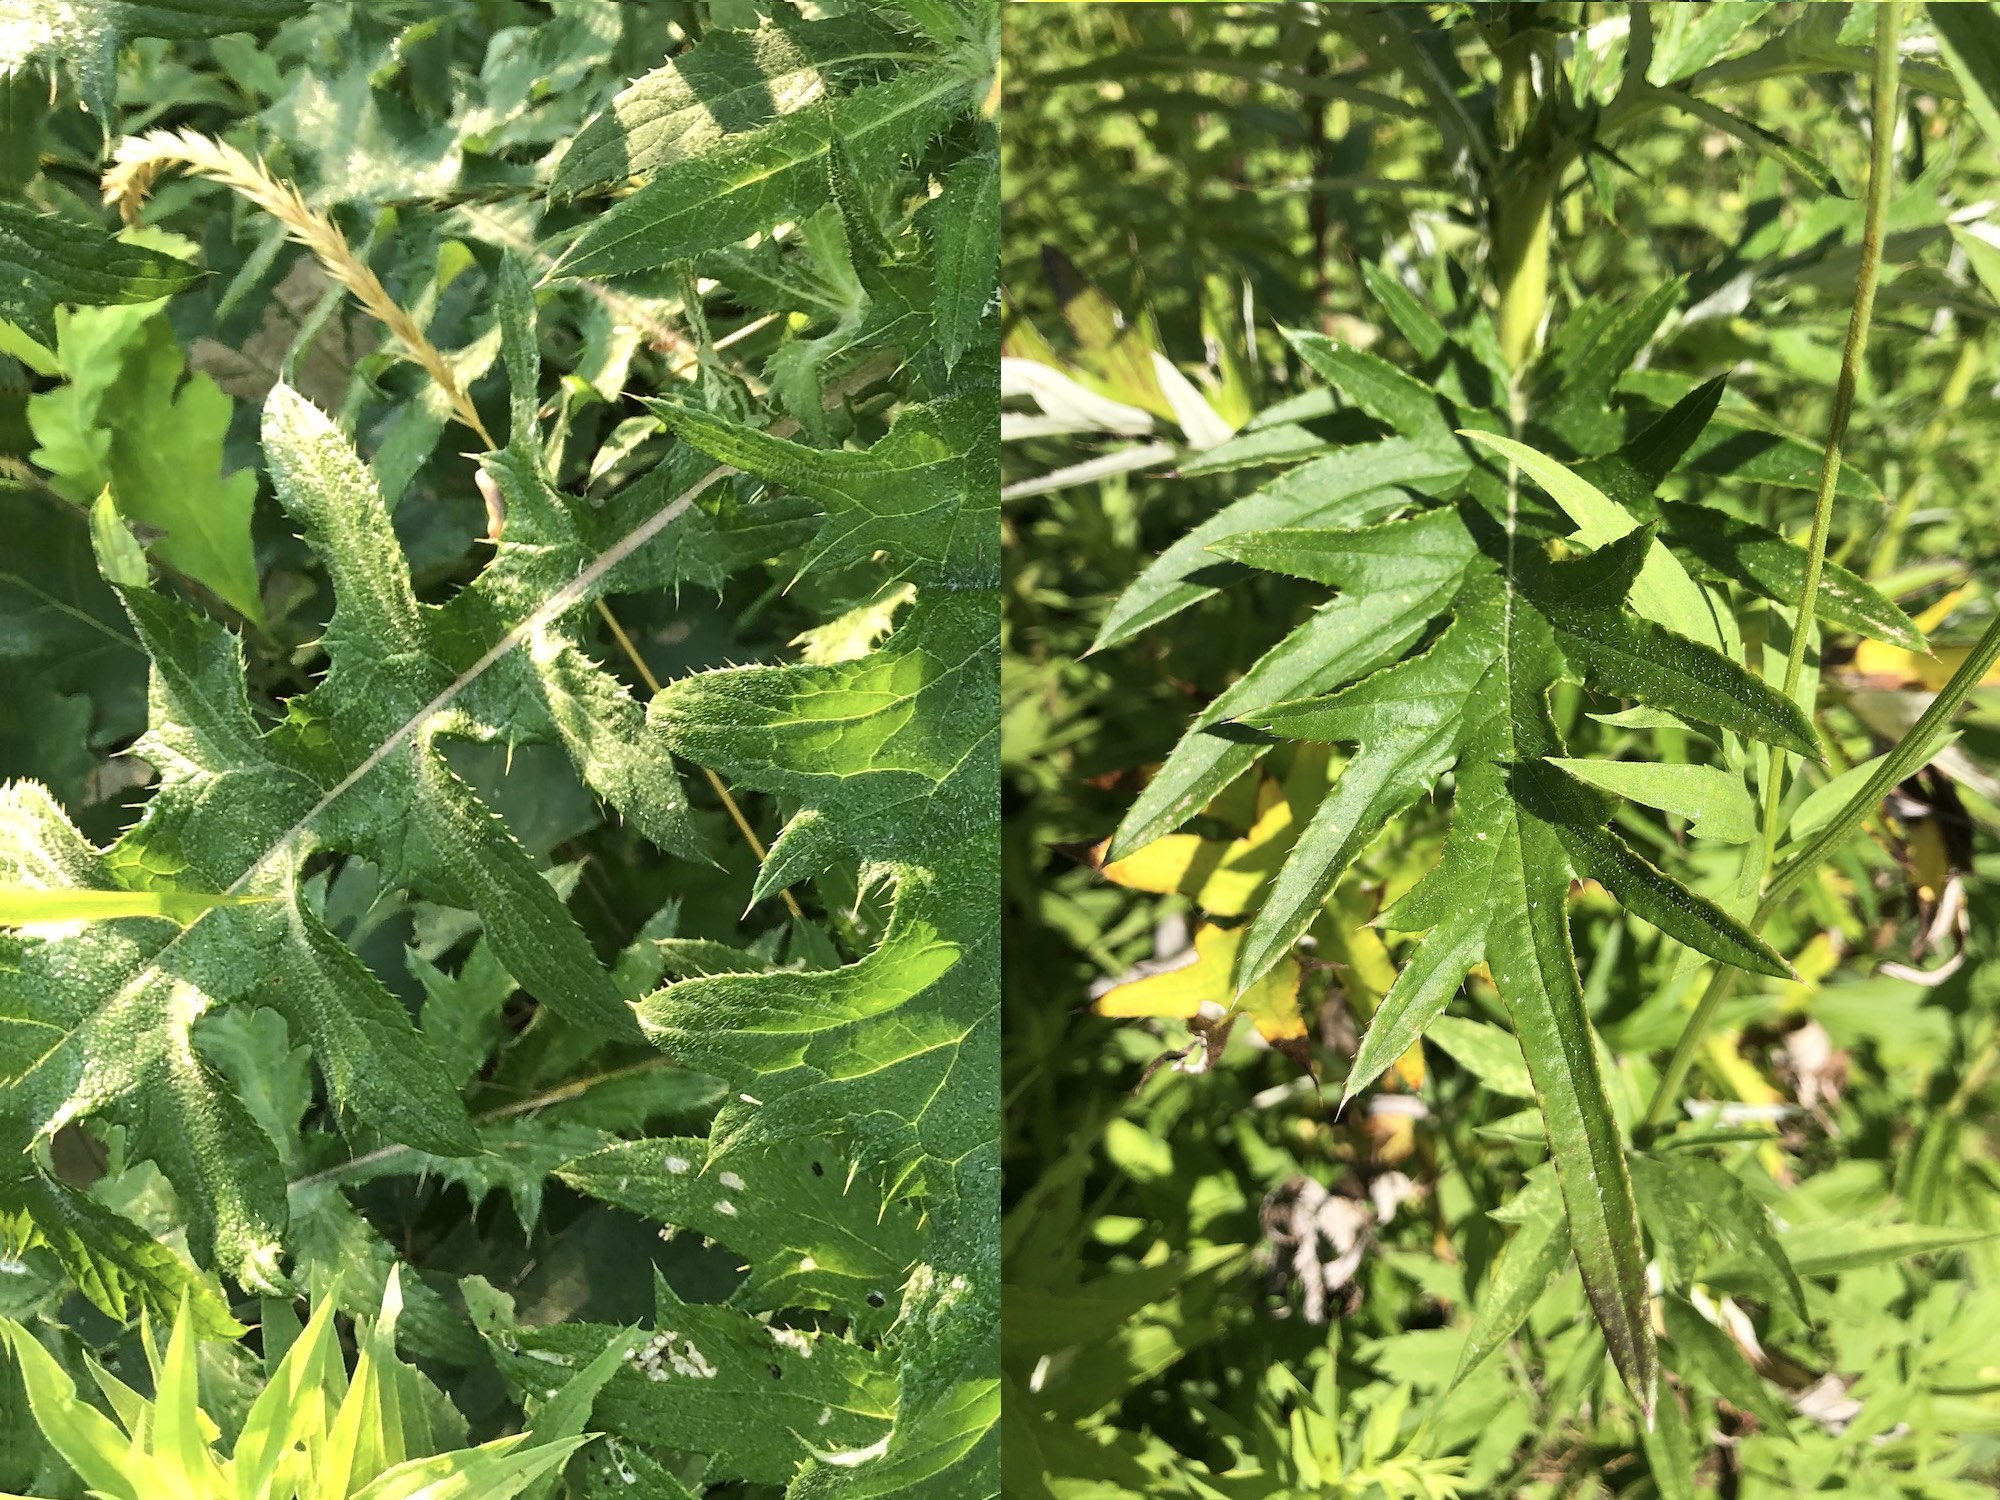 On the left is a lower leaf of Tall Thistle photographed in the Oak Savanna and on the right is a lower leaf of a Field Thistle leaf photographed in the UW Arboretum's Curtis Prairie in Madison, Wisconsin.